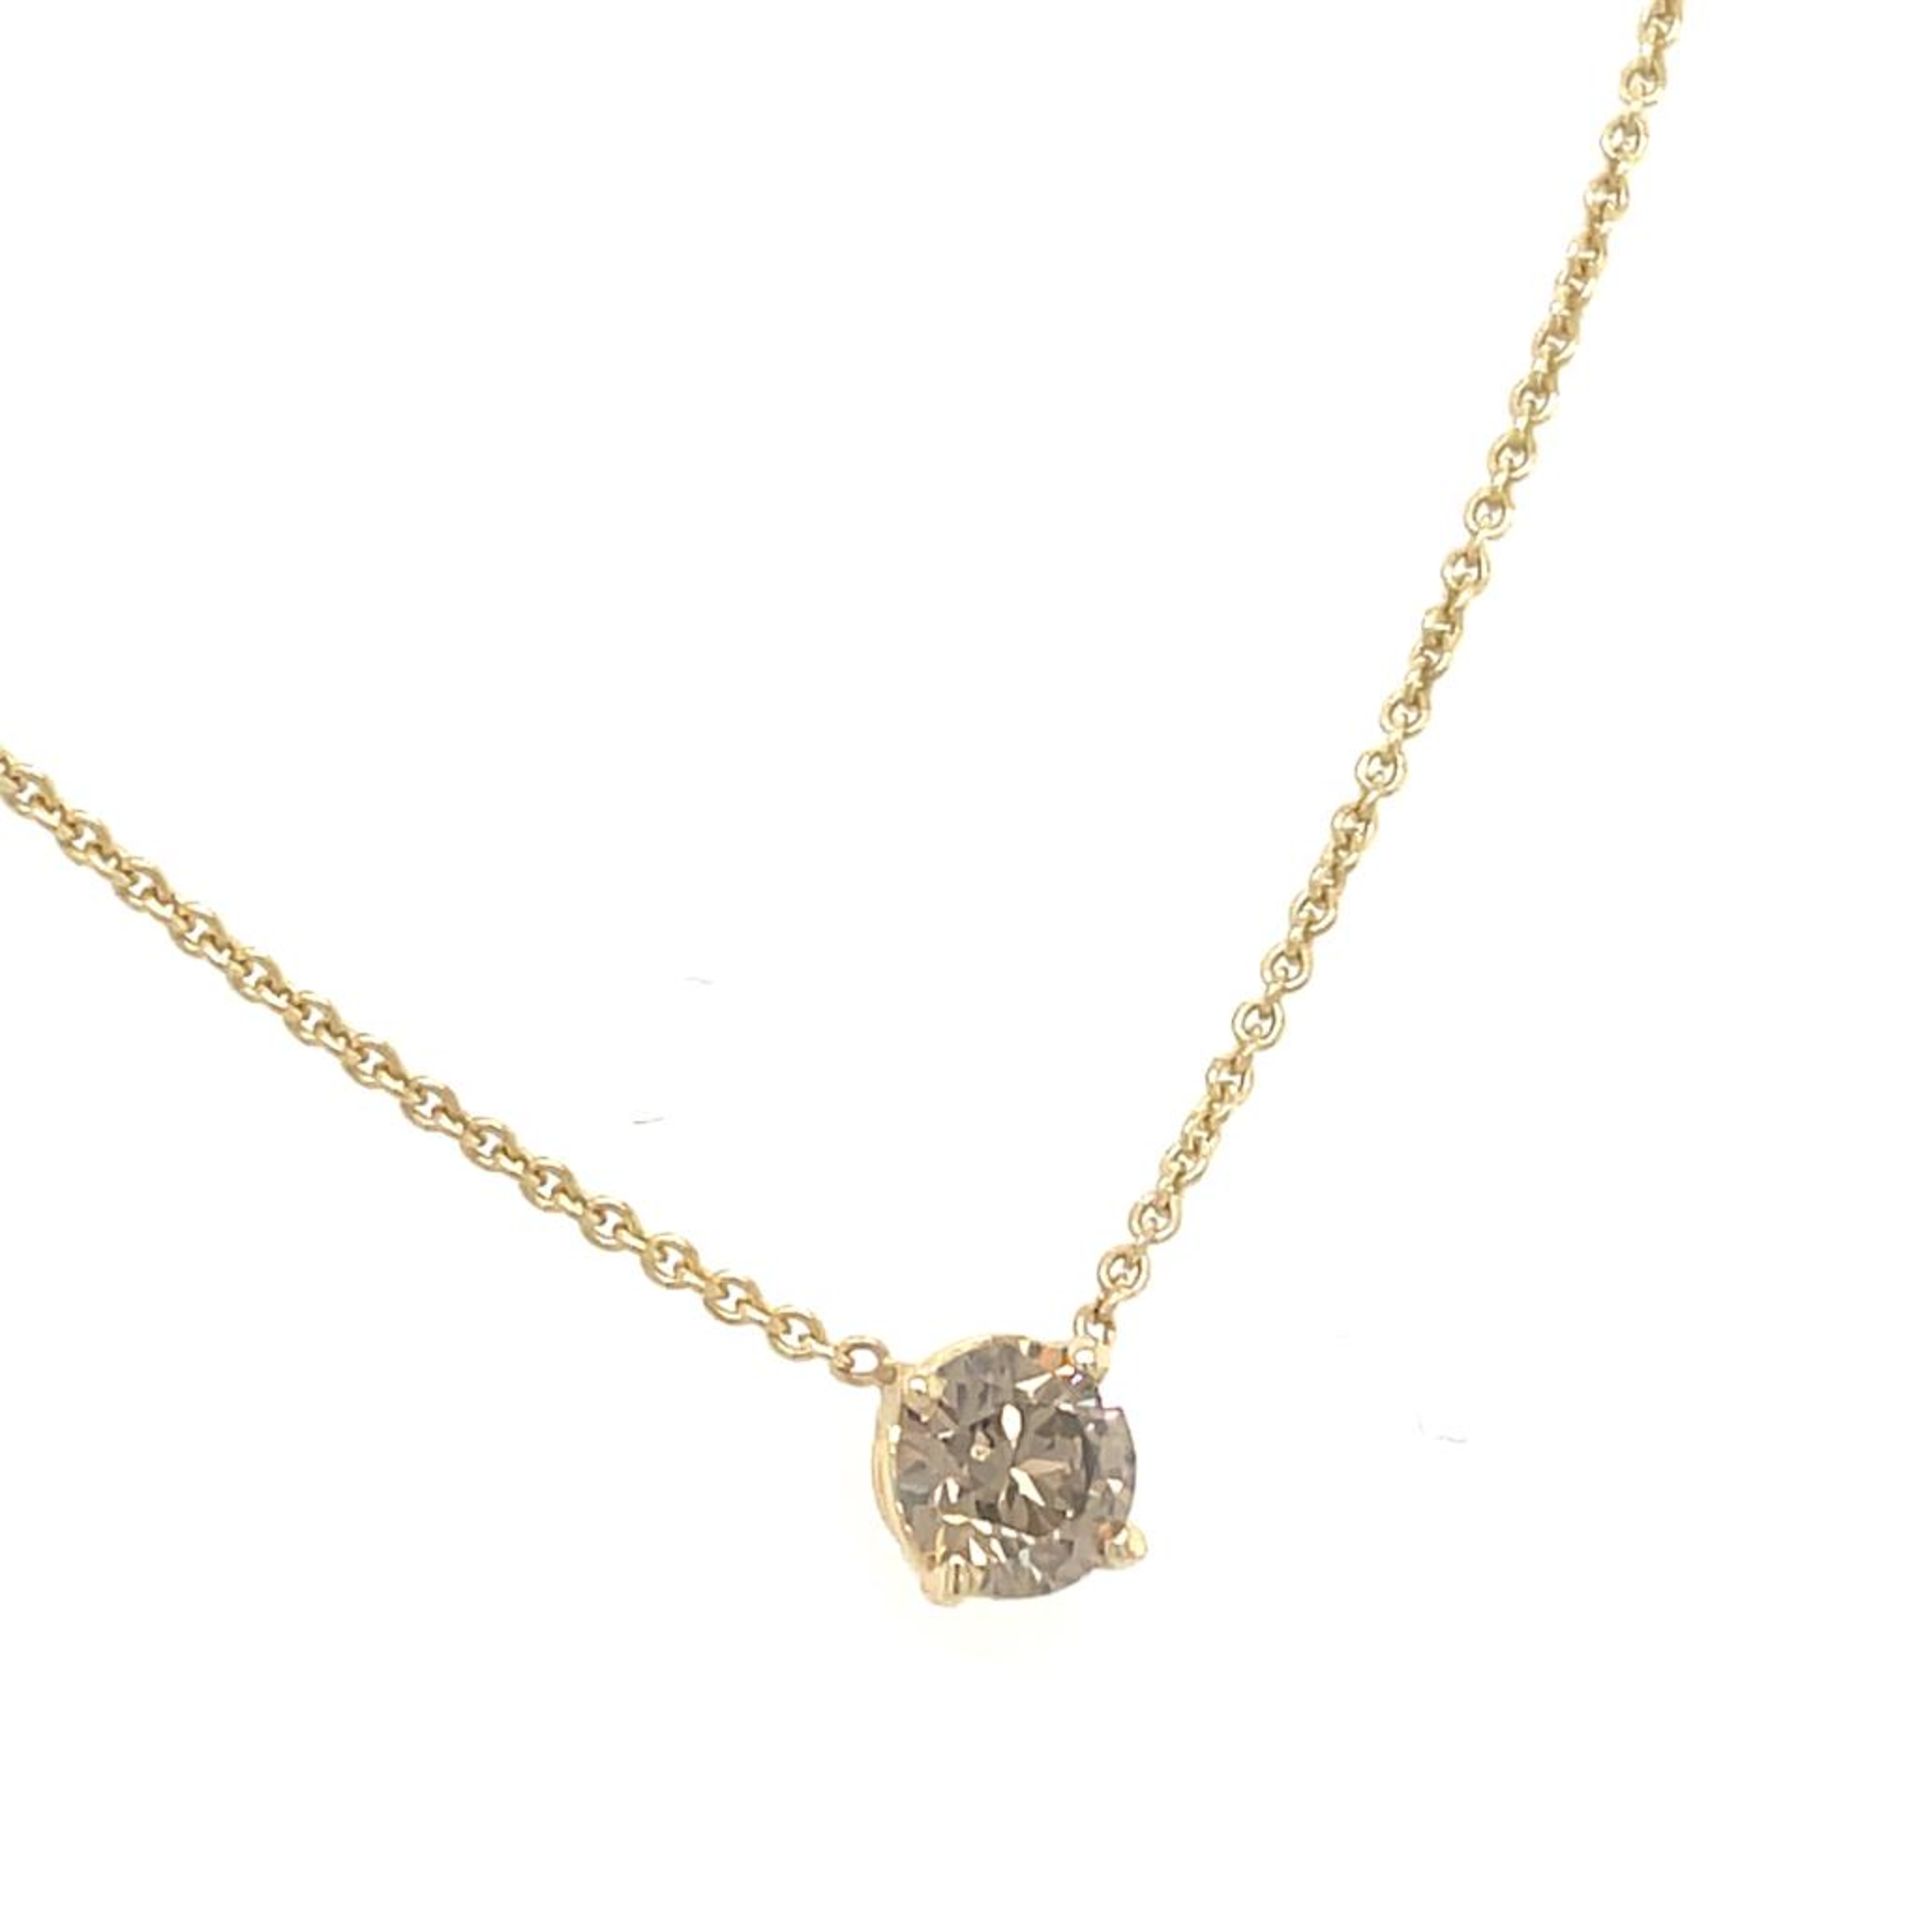 14K YELLOW GOLD 1.97G DIAMOND NECKLACE 0.56 CT NATURAL FANCY DEEP BROWN/VS1 CERTIFICATION AIG - - Image 3 of 4